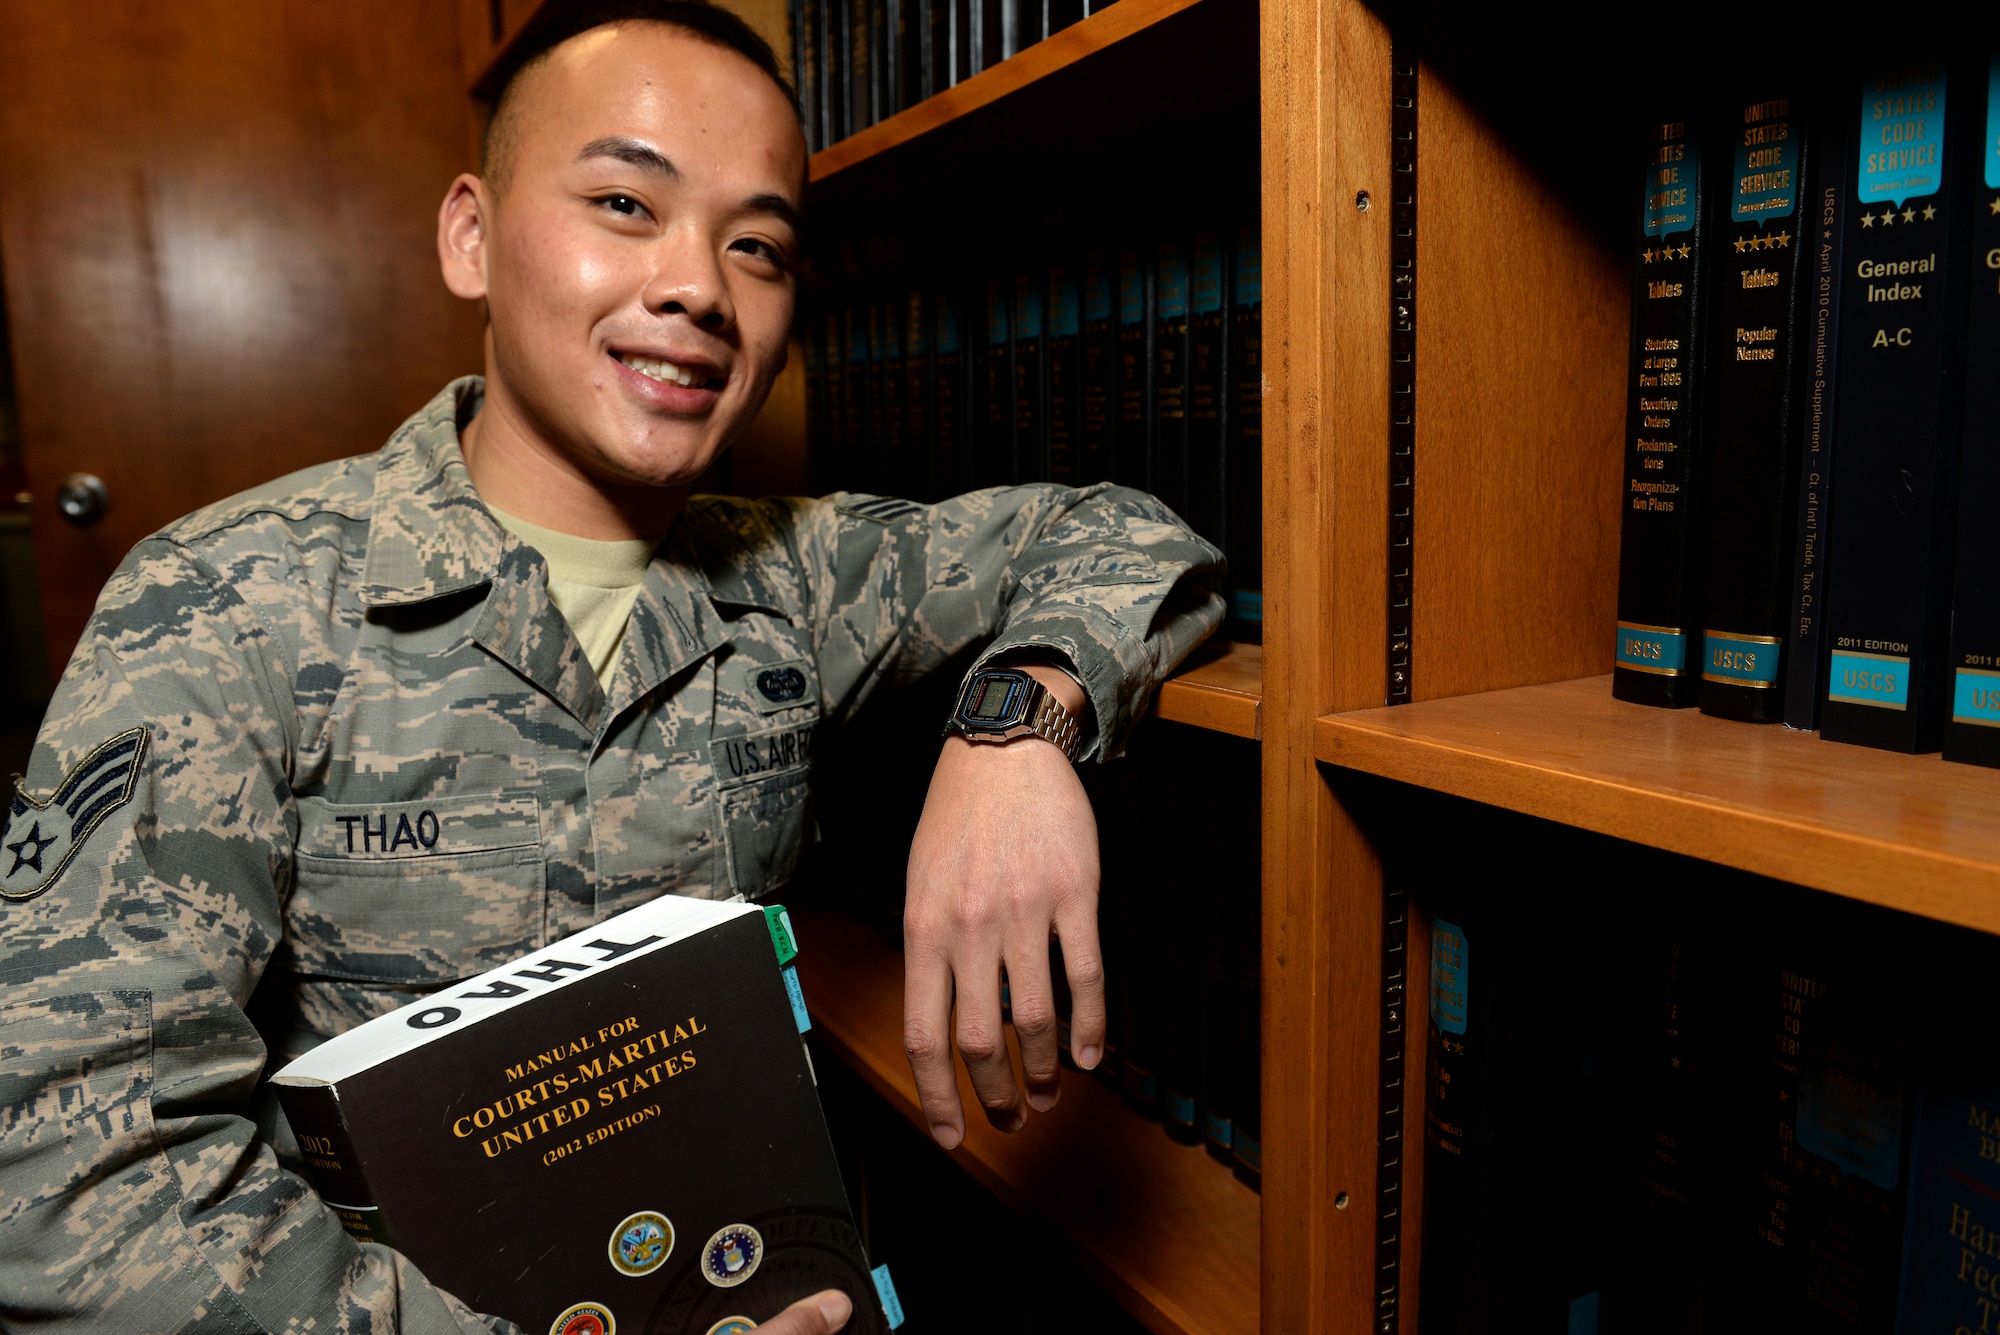 Senior Airman Yia Thao, a 19th Airlift Wing Judge Advocate paralegal, was born in Thailand in the American refugee camp of Bamvinah. Thao was recently selected for the Airman Scholarship Commissioning Program, that offers active duty enlisted personnel, who can complete all bachelor degree and commissioning requirements in 2 to 4 years, the opportunity to earn a commission as an Air Force ROTC cadet. (U.S. Air Force photo by Staff Sgt. Jessica Condit)